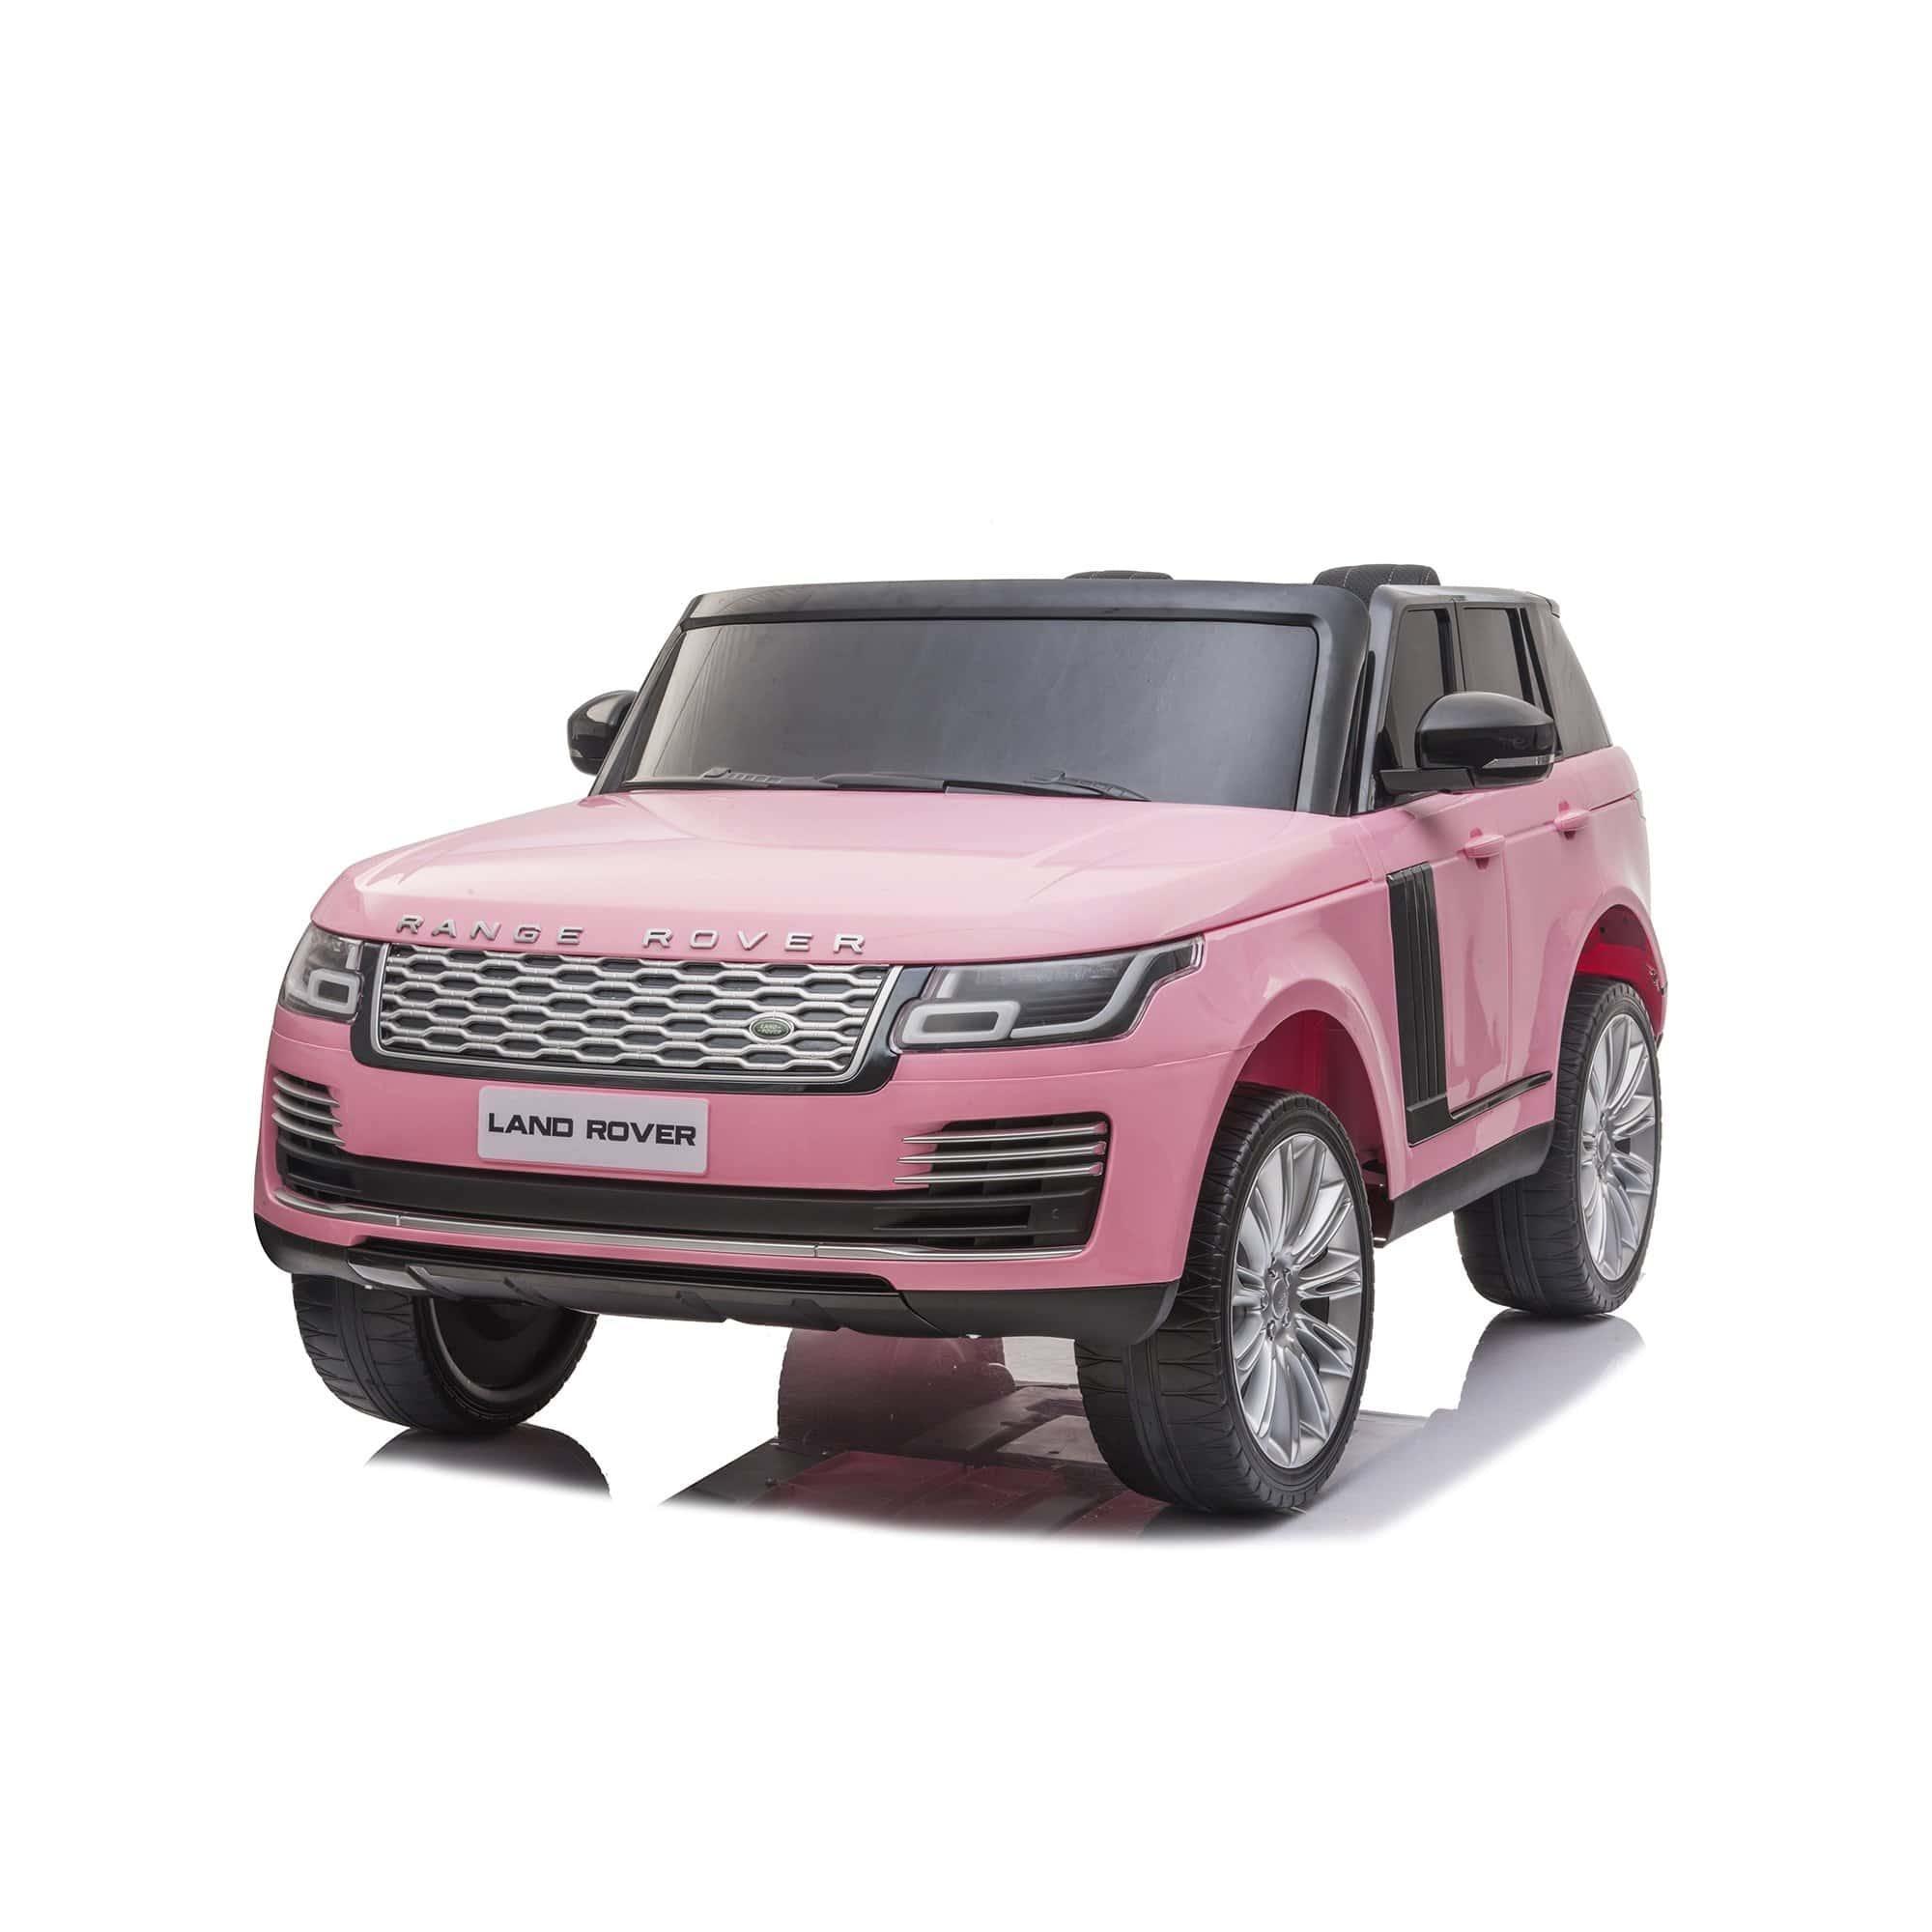 12V Range Rover HSE 2 Seater Ride on Car - American Kids Cars